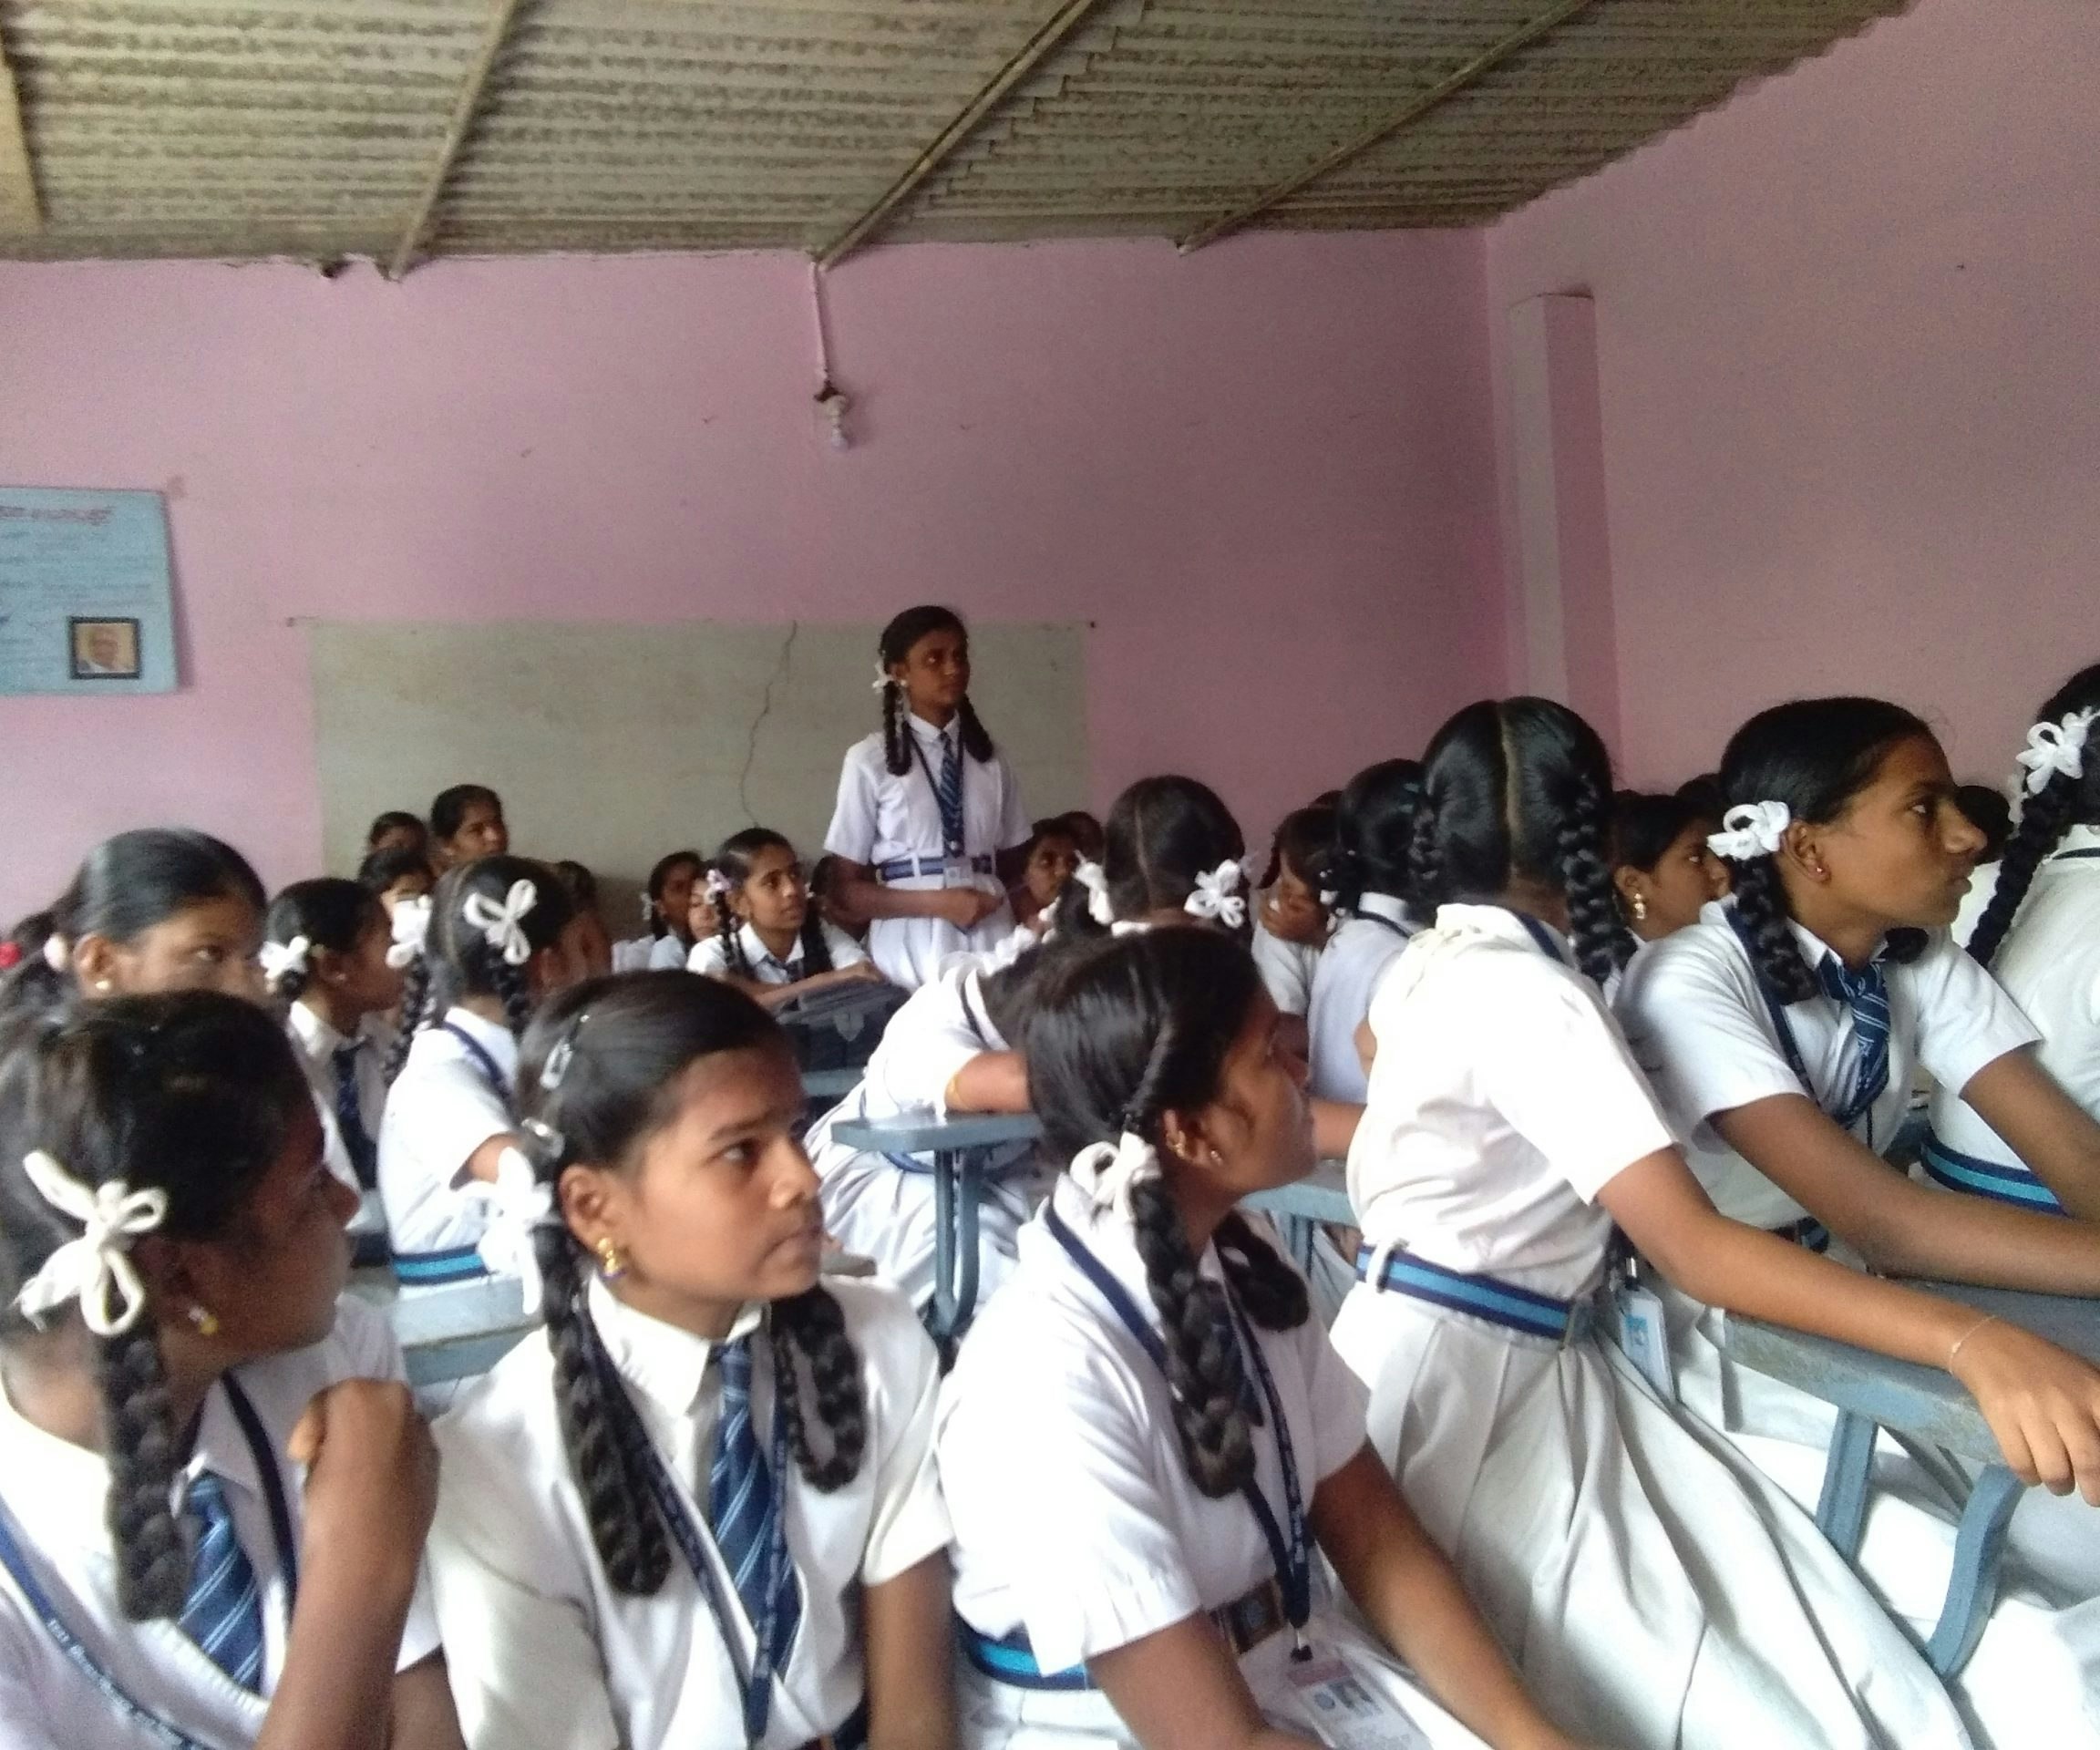 Team of Teens in India are Fighting Menstruation Stigma and Establishing Period Dignity